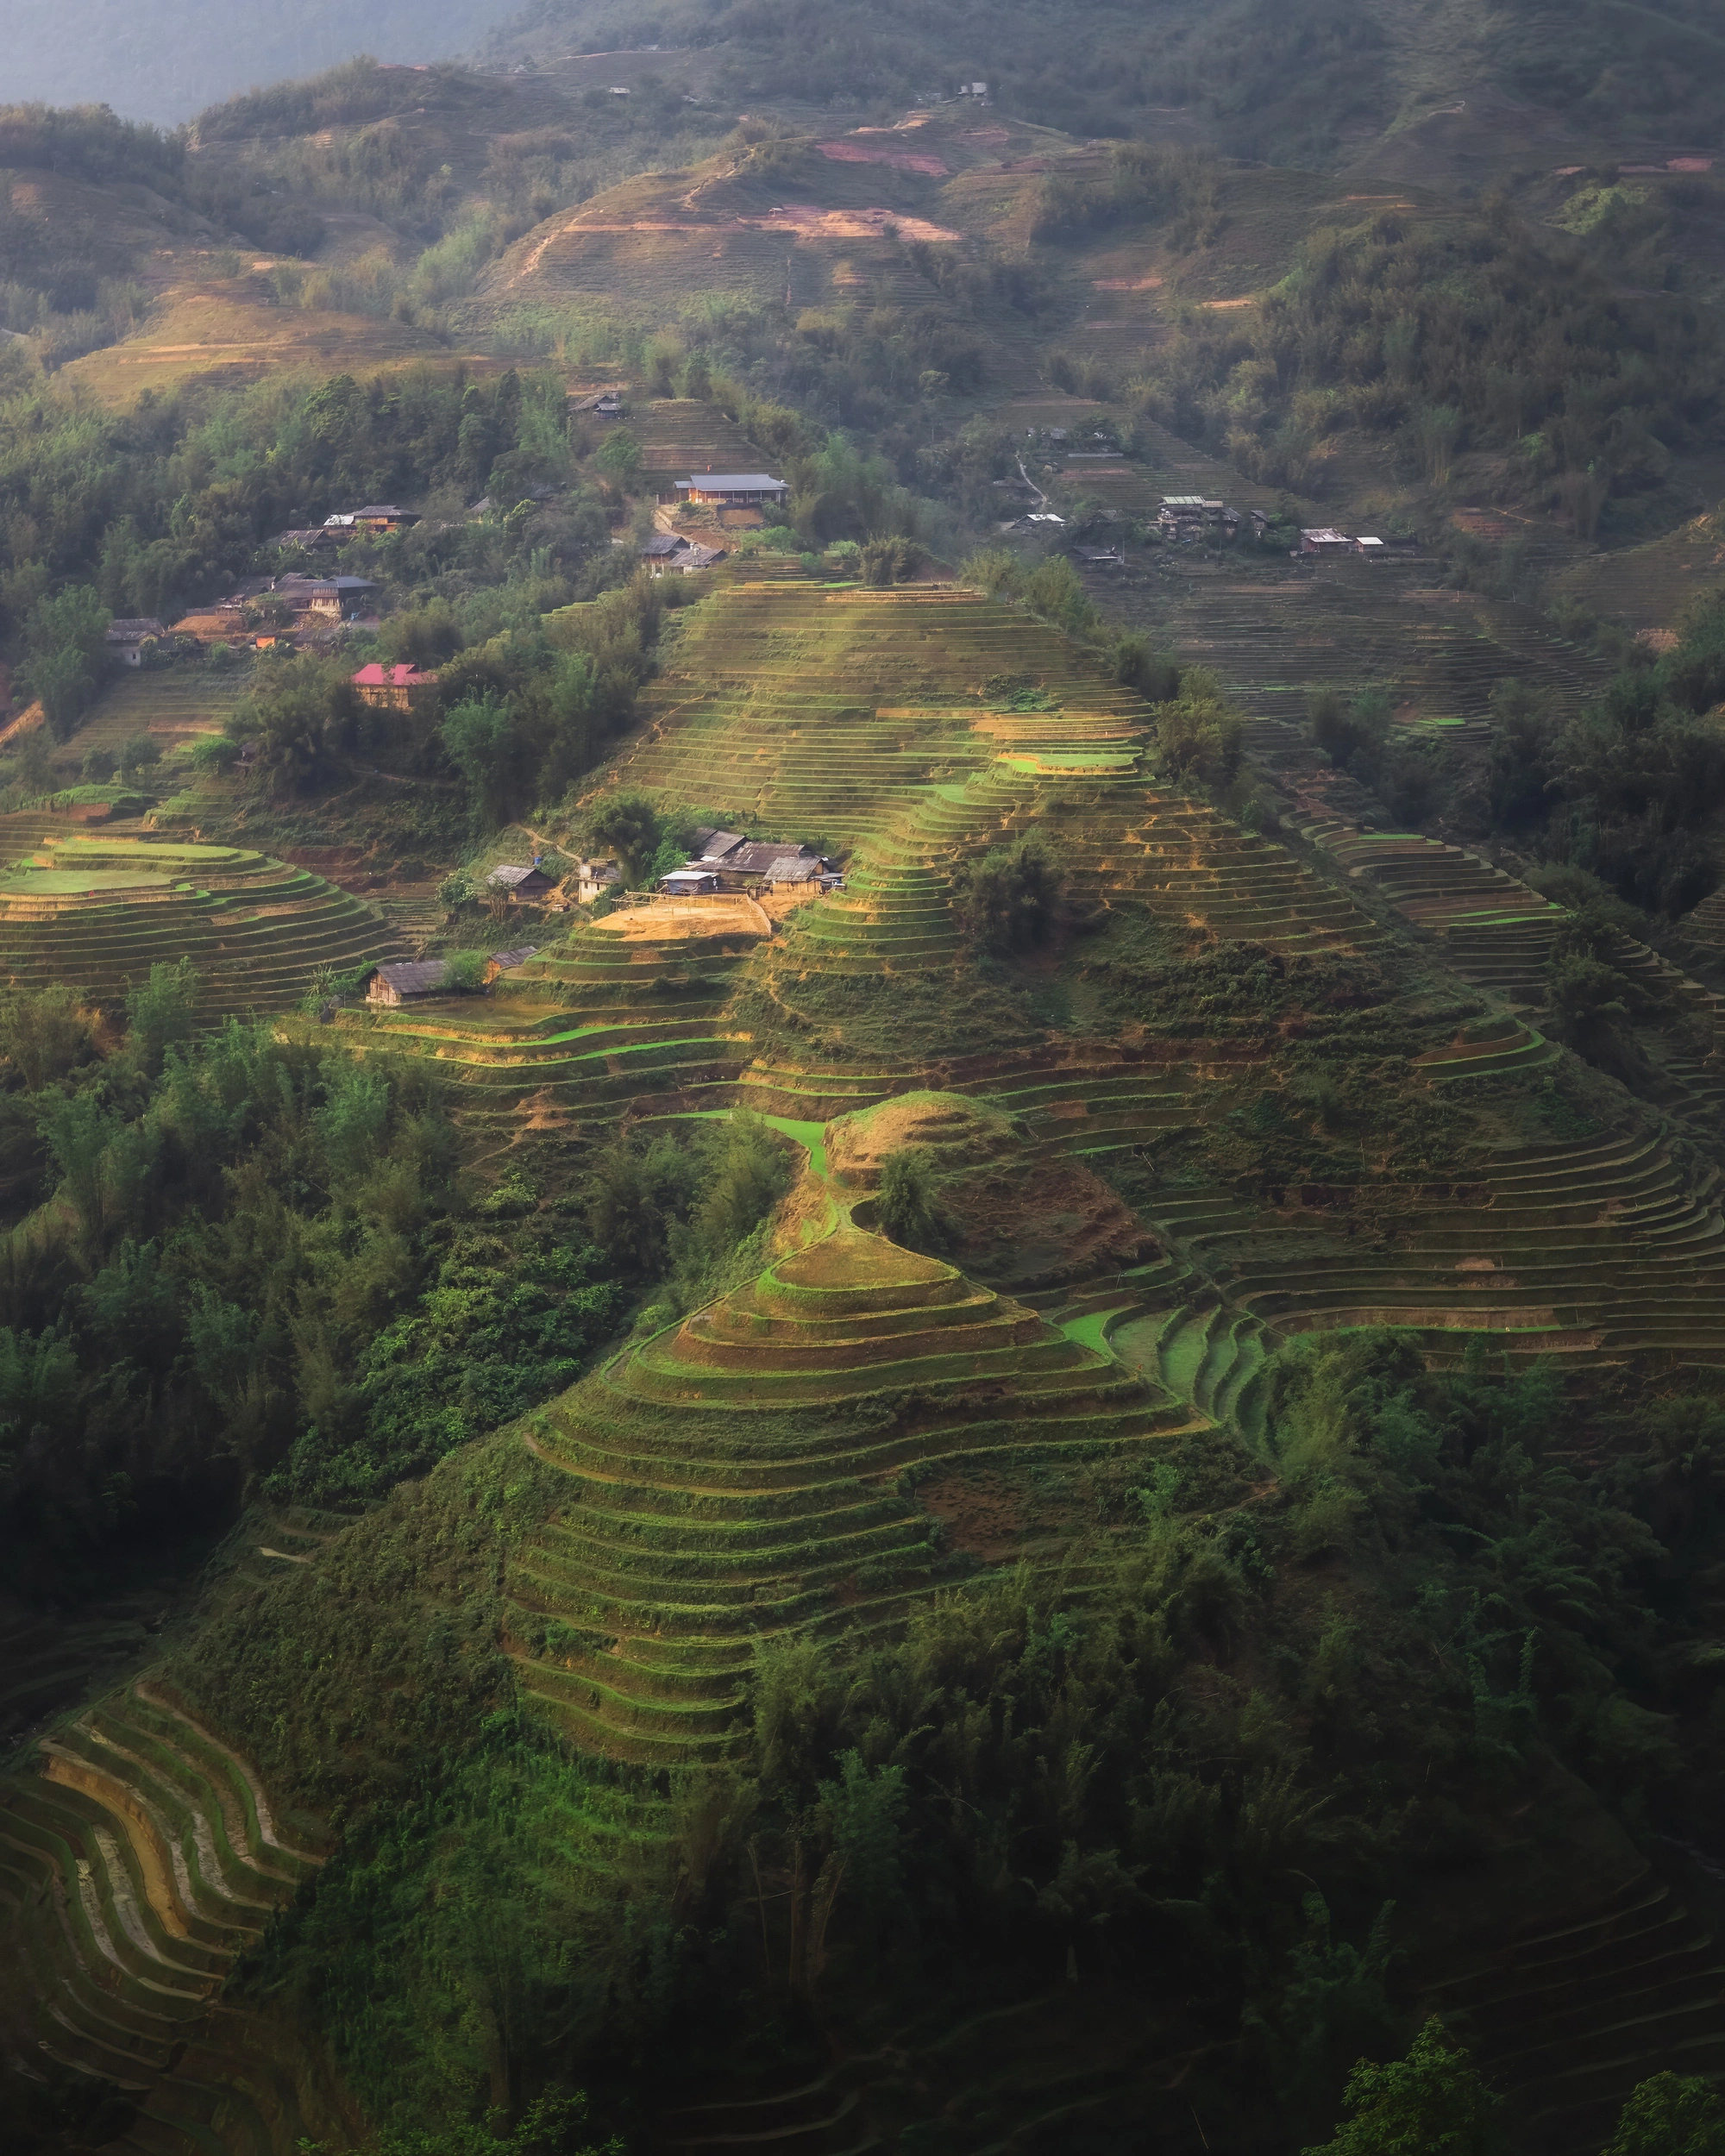 Terraced paddy fields in Sa Pa Town, Lao Cai Province, northern Vietnam. Photo taken by Harry Bradley